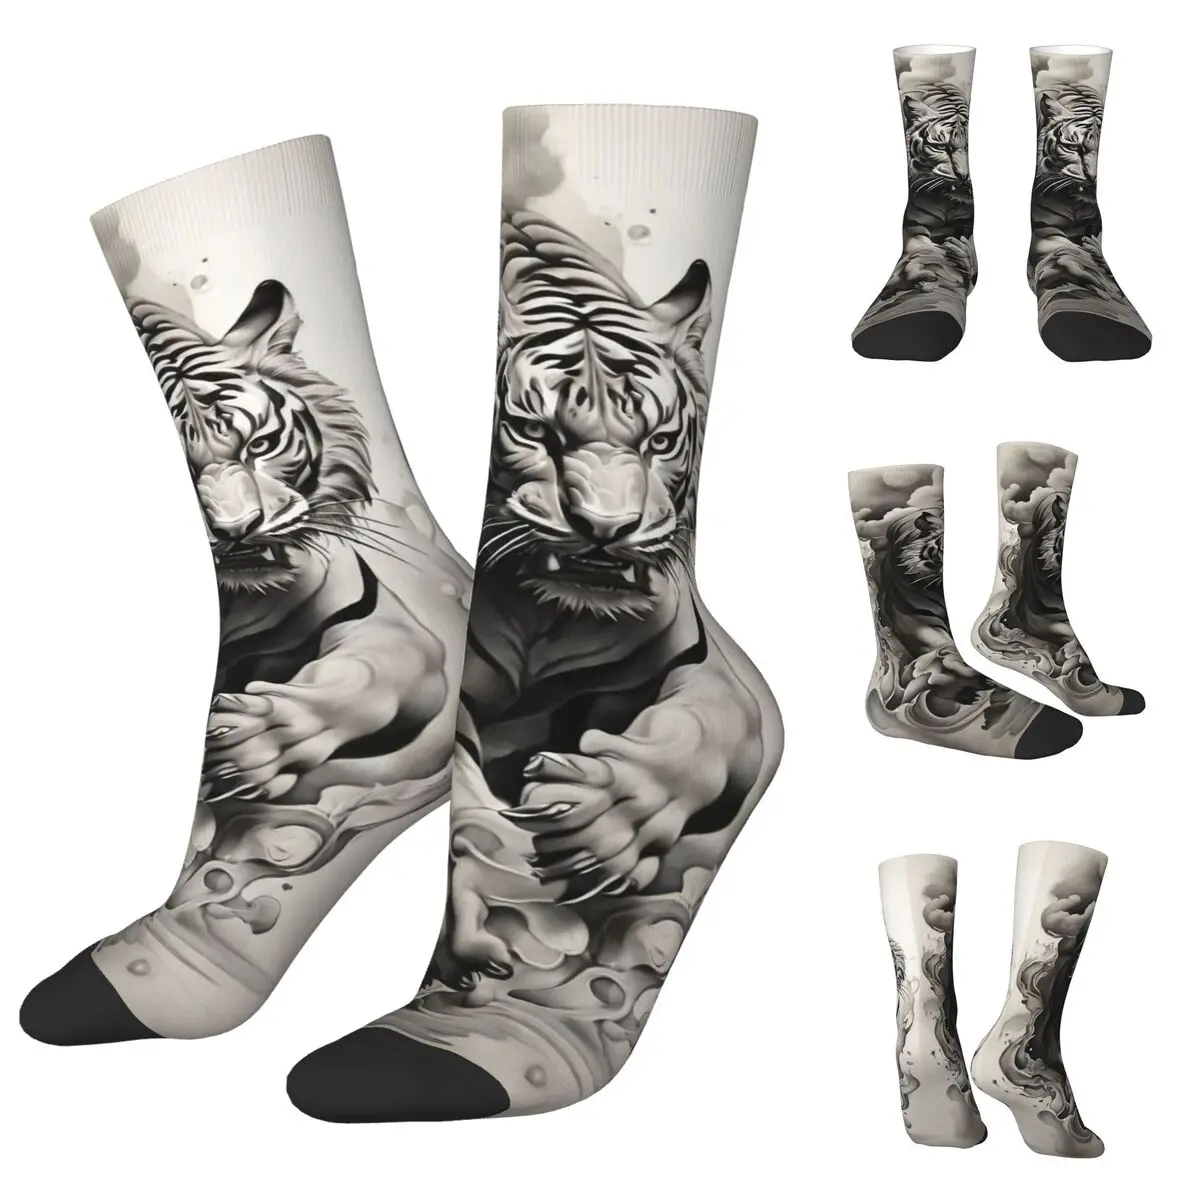 Cool Animals, Lions, Tigers, Gorillas Men Women Socks,Windproof Beautiful printing Suitable for all seasons Dressing Gifts